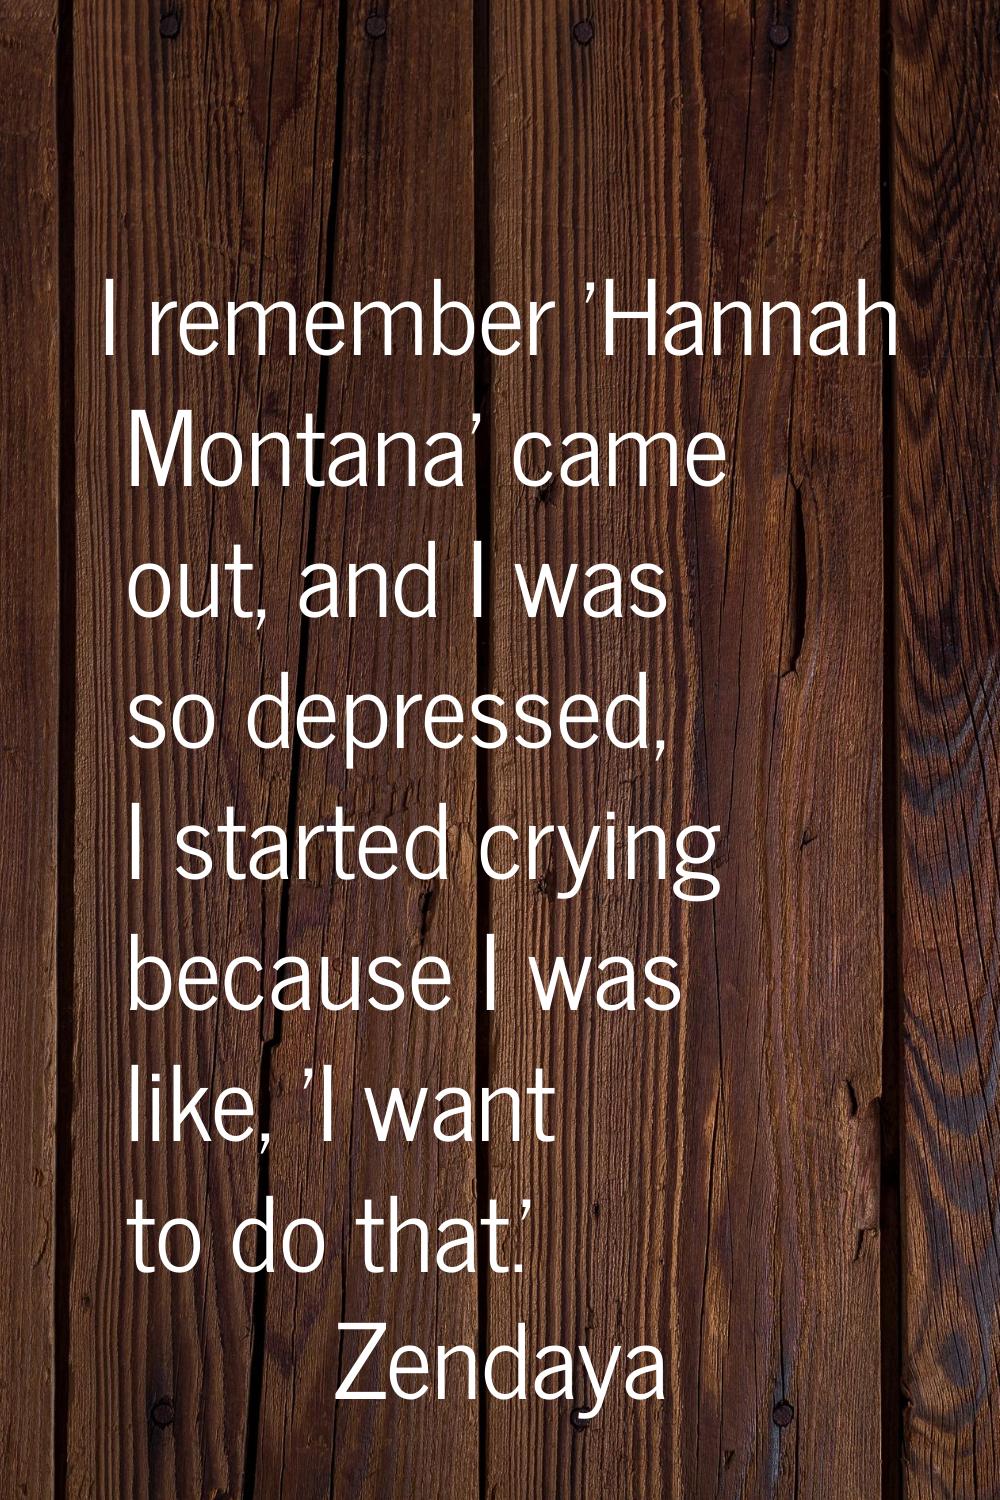 I remember 'Hannah Montana' came out, and I was so depressed, I started crying because I was like, 